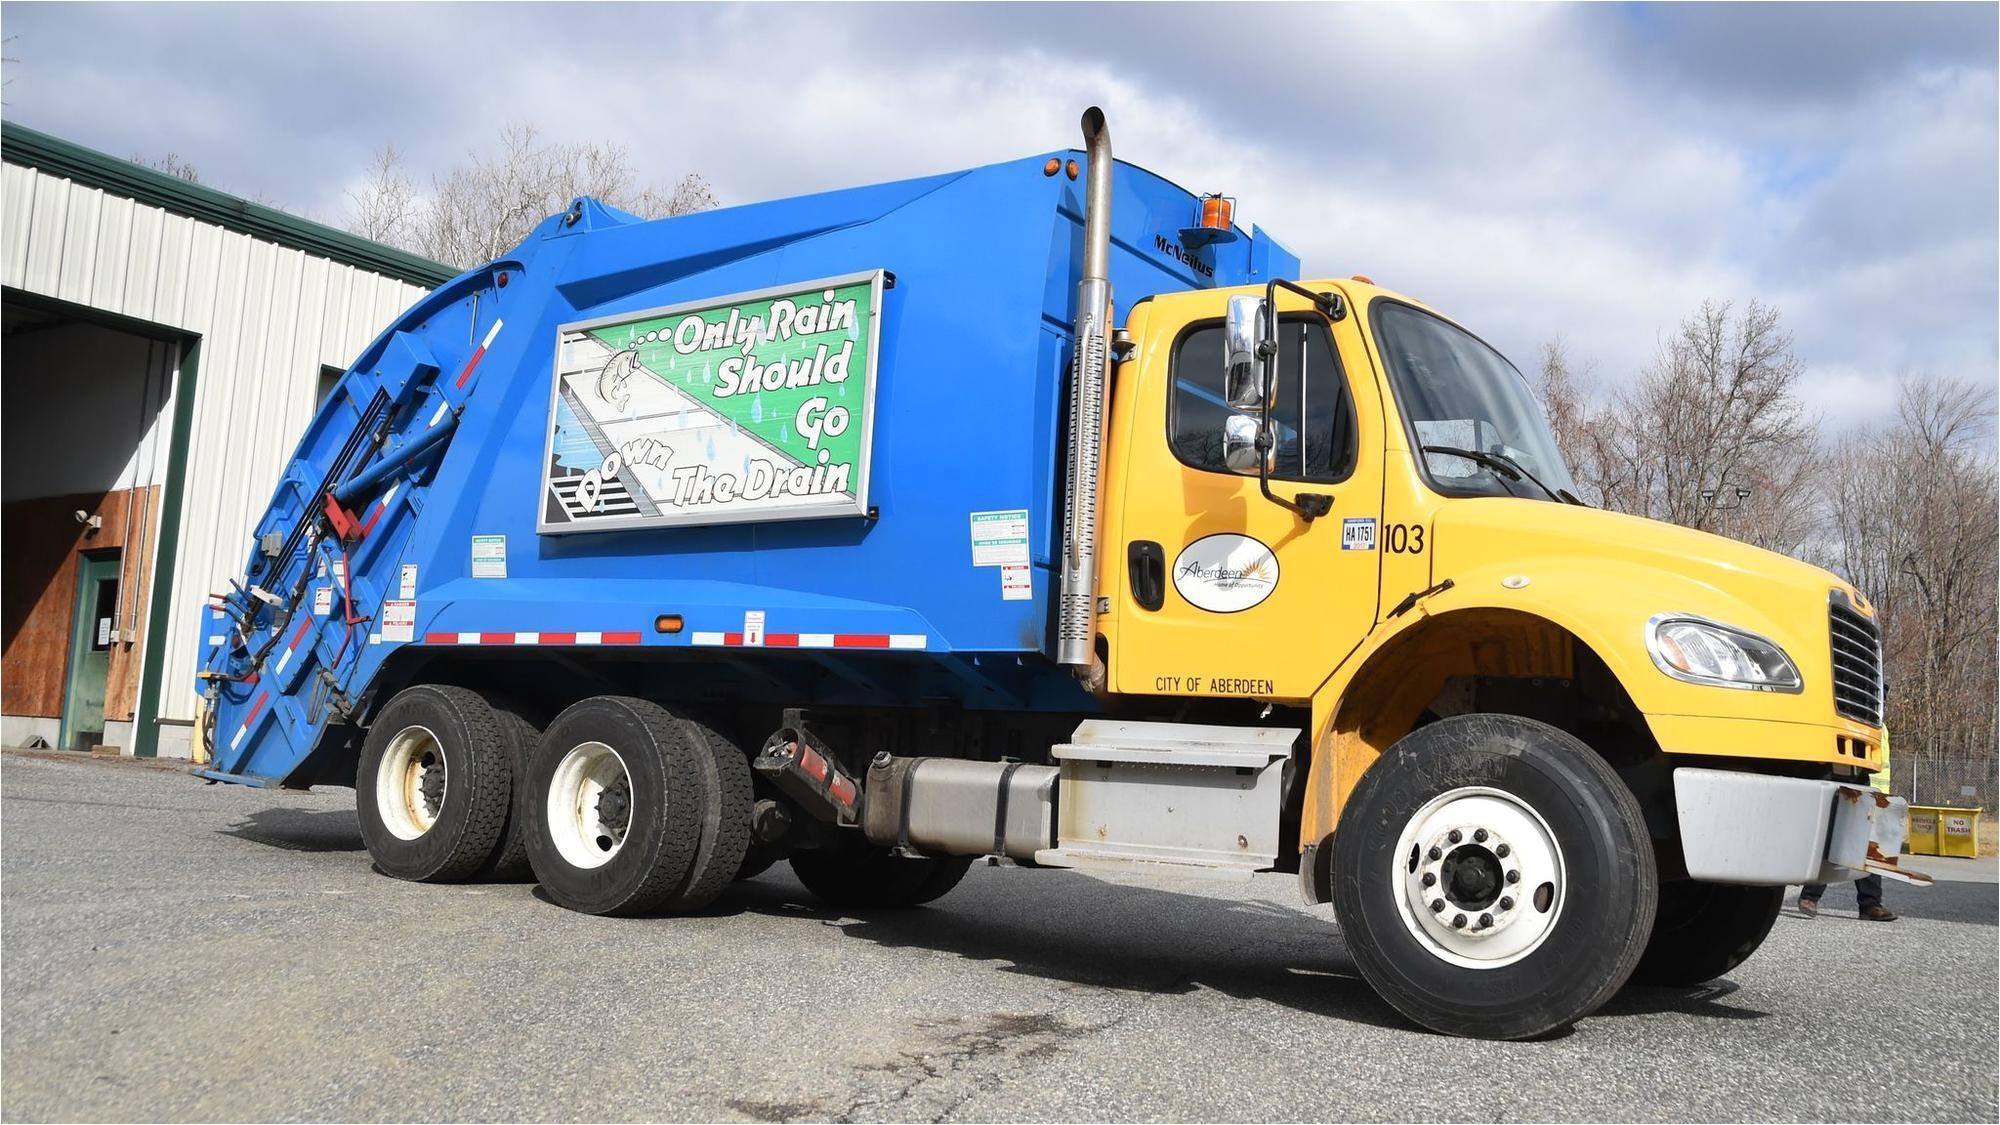 Harford County Trash Pickup New Aberdeen Trash Pickup System to Begin July 1 Stickers